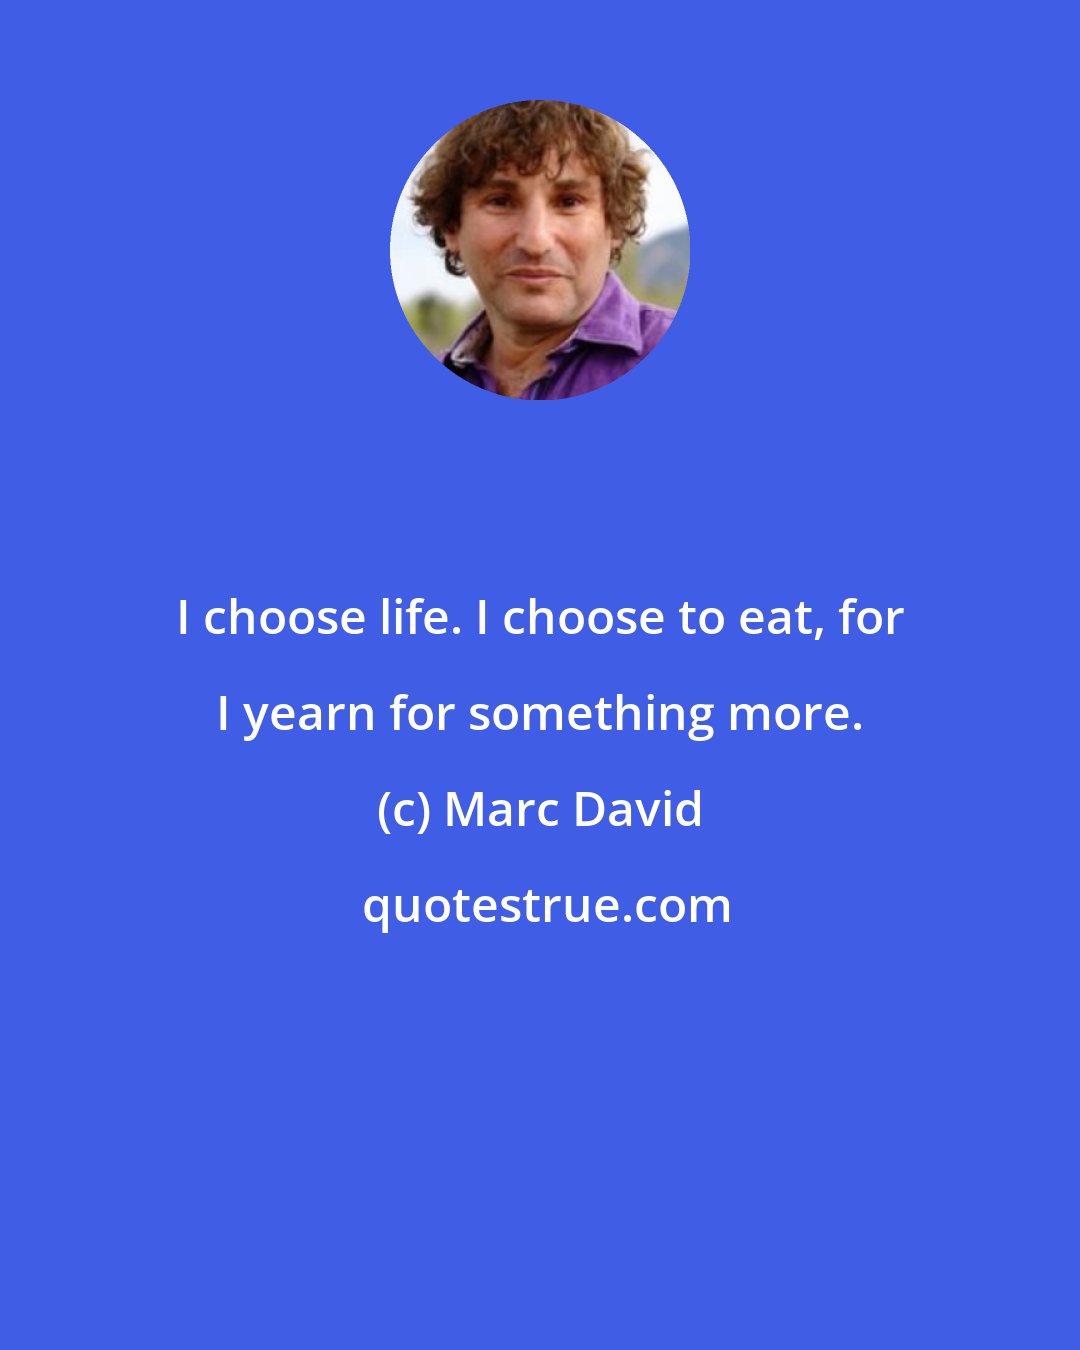 Marc David: I choose life. I choose to eat, for I yearn for something more.